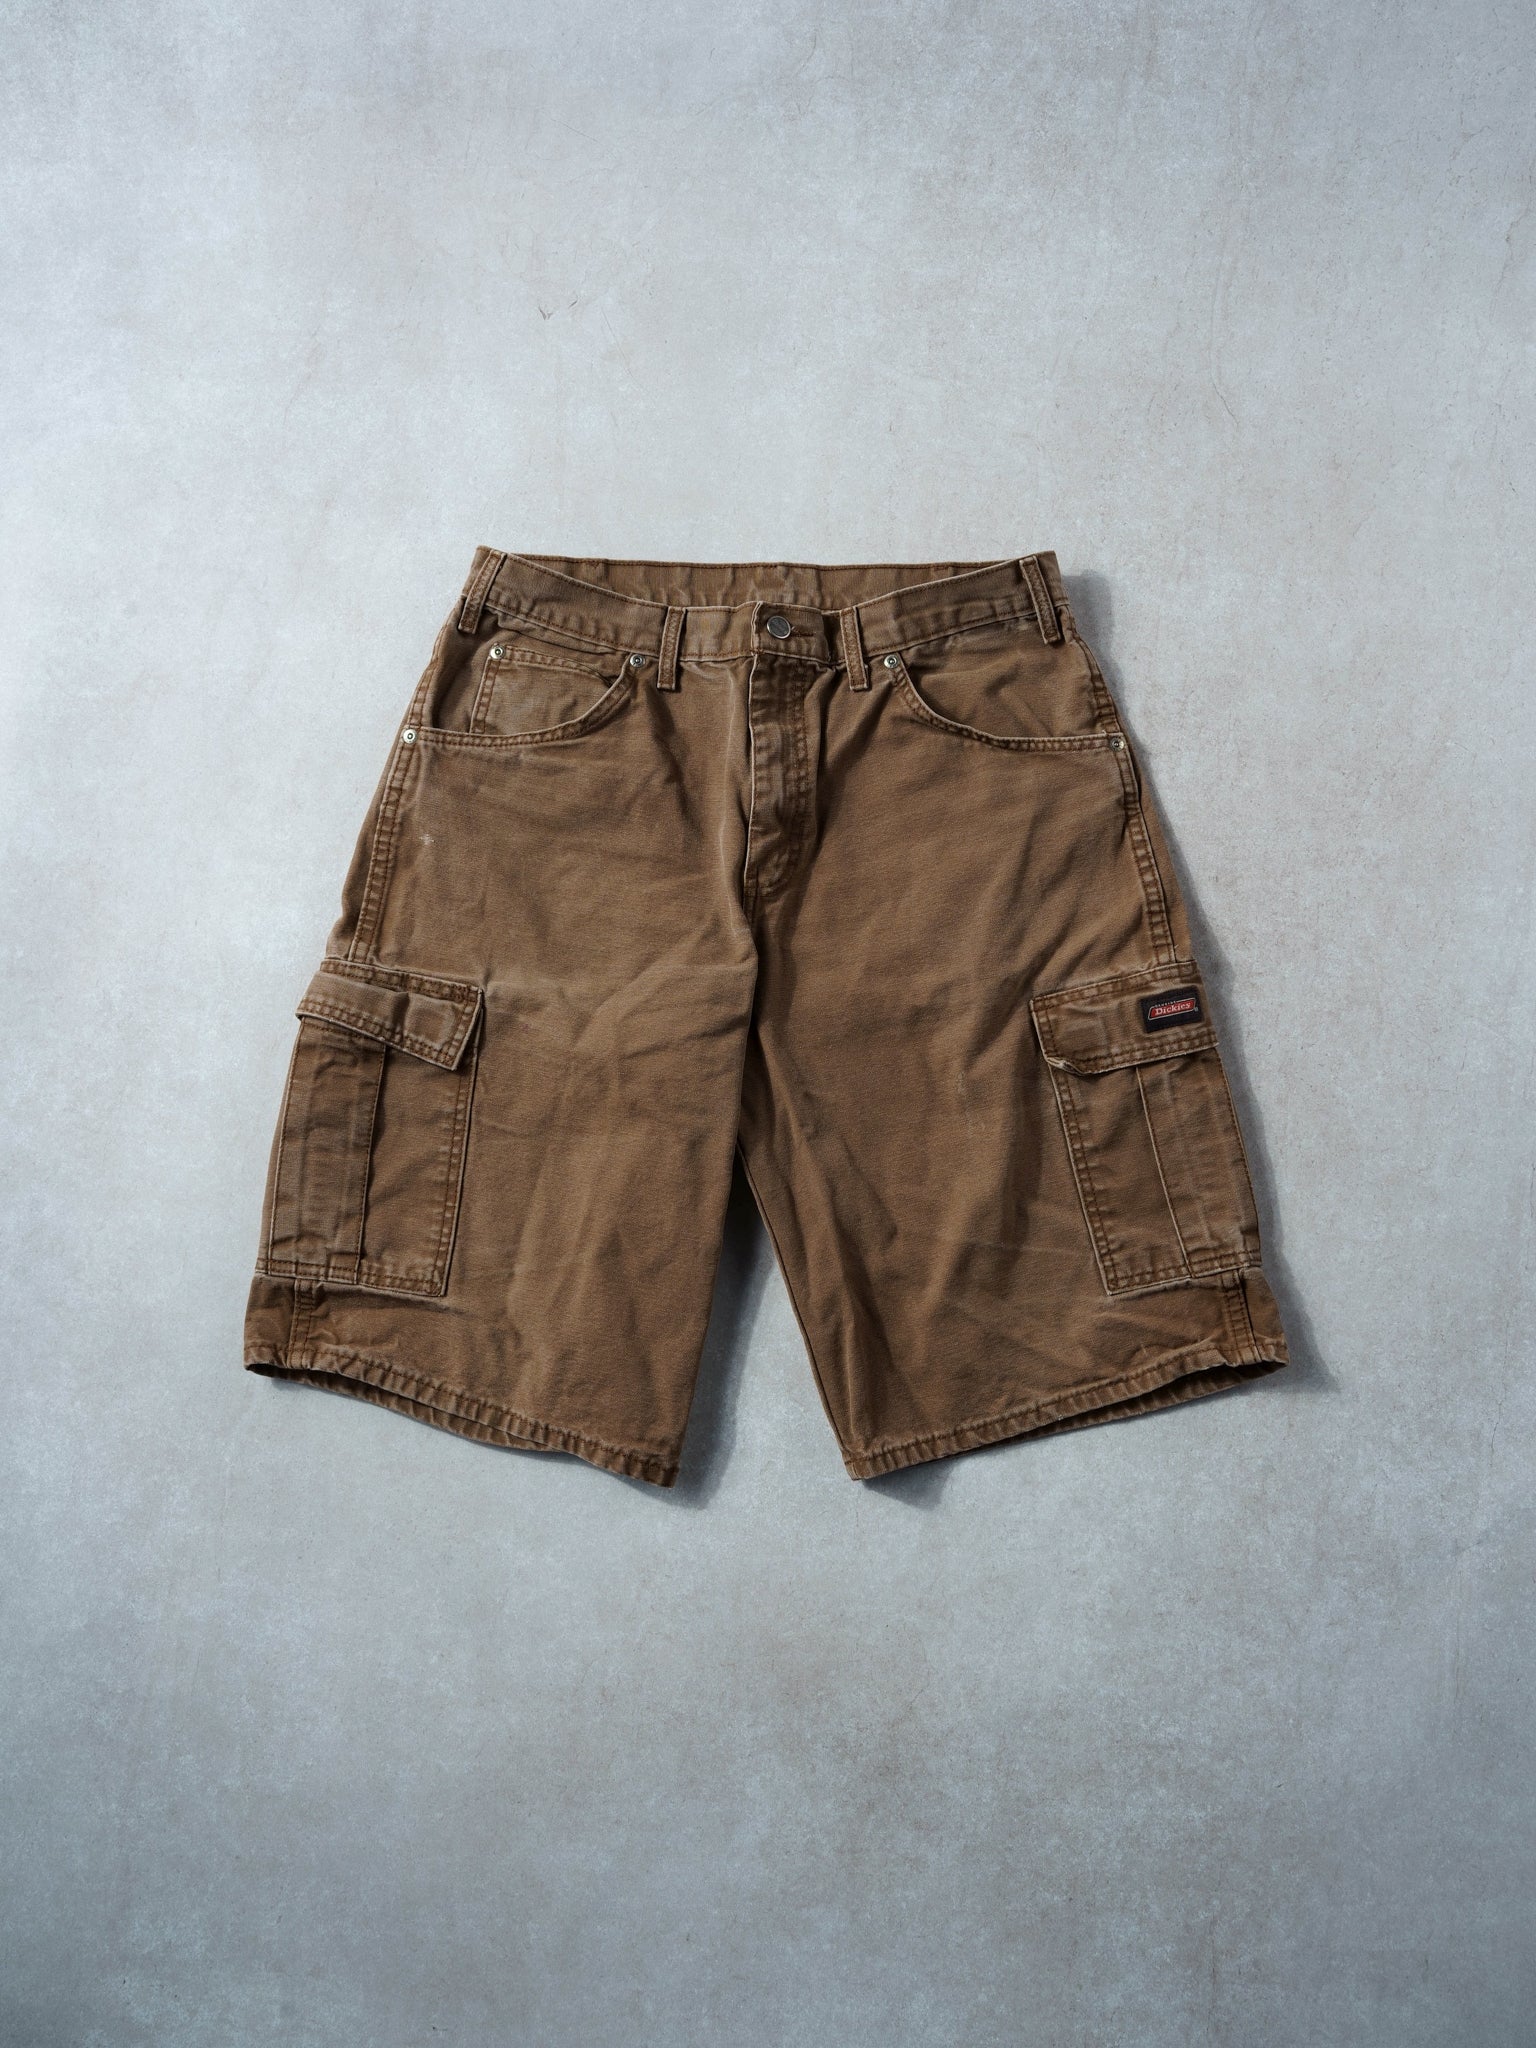 Vintage 90s Sun Faded Brown Dickies Cargo Shorts (34x13)